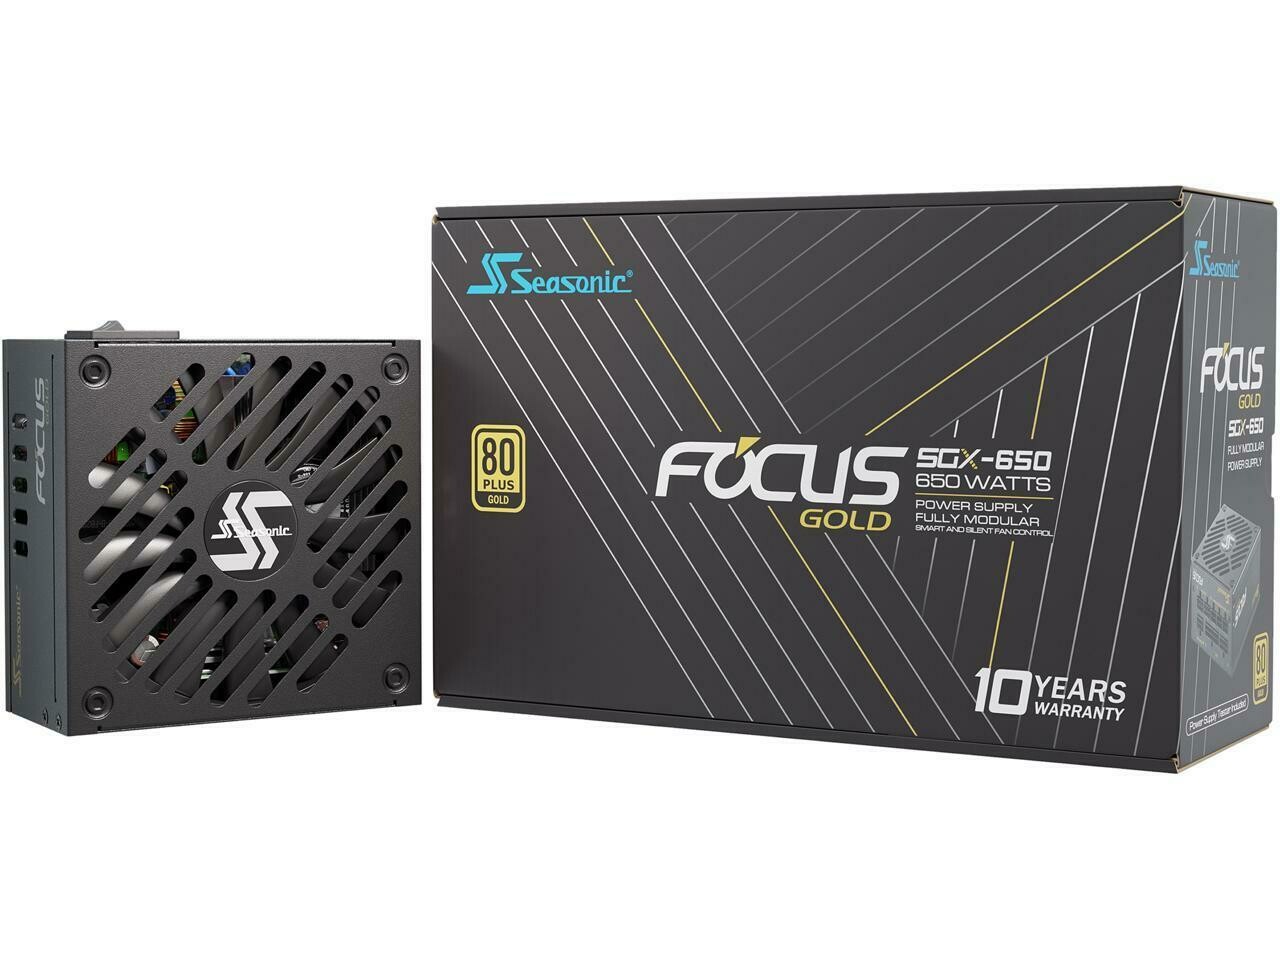 Seasonic FOCUS SGX-650, 650W 80+ Gold, Full-Modular, SFX-L Form Factor, Compact Size, Fan Control in Fanless, Silent, and Cooling Mode Power Supply